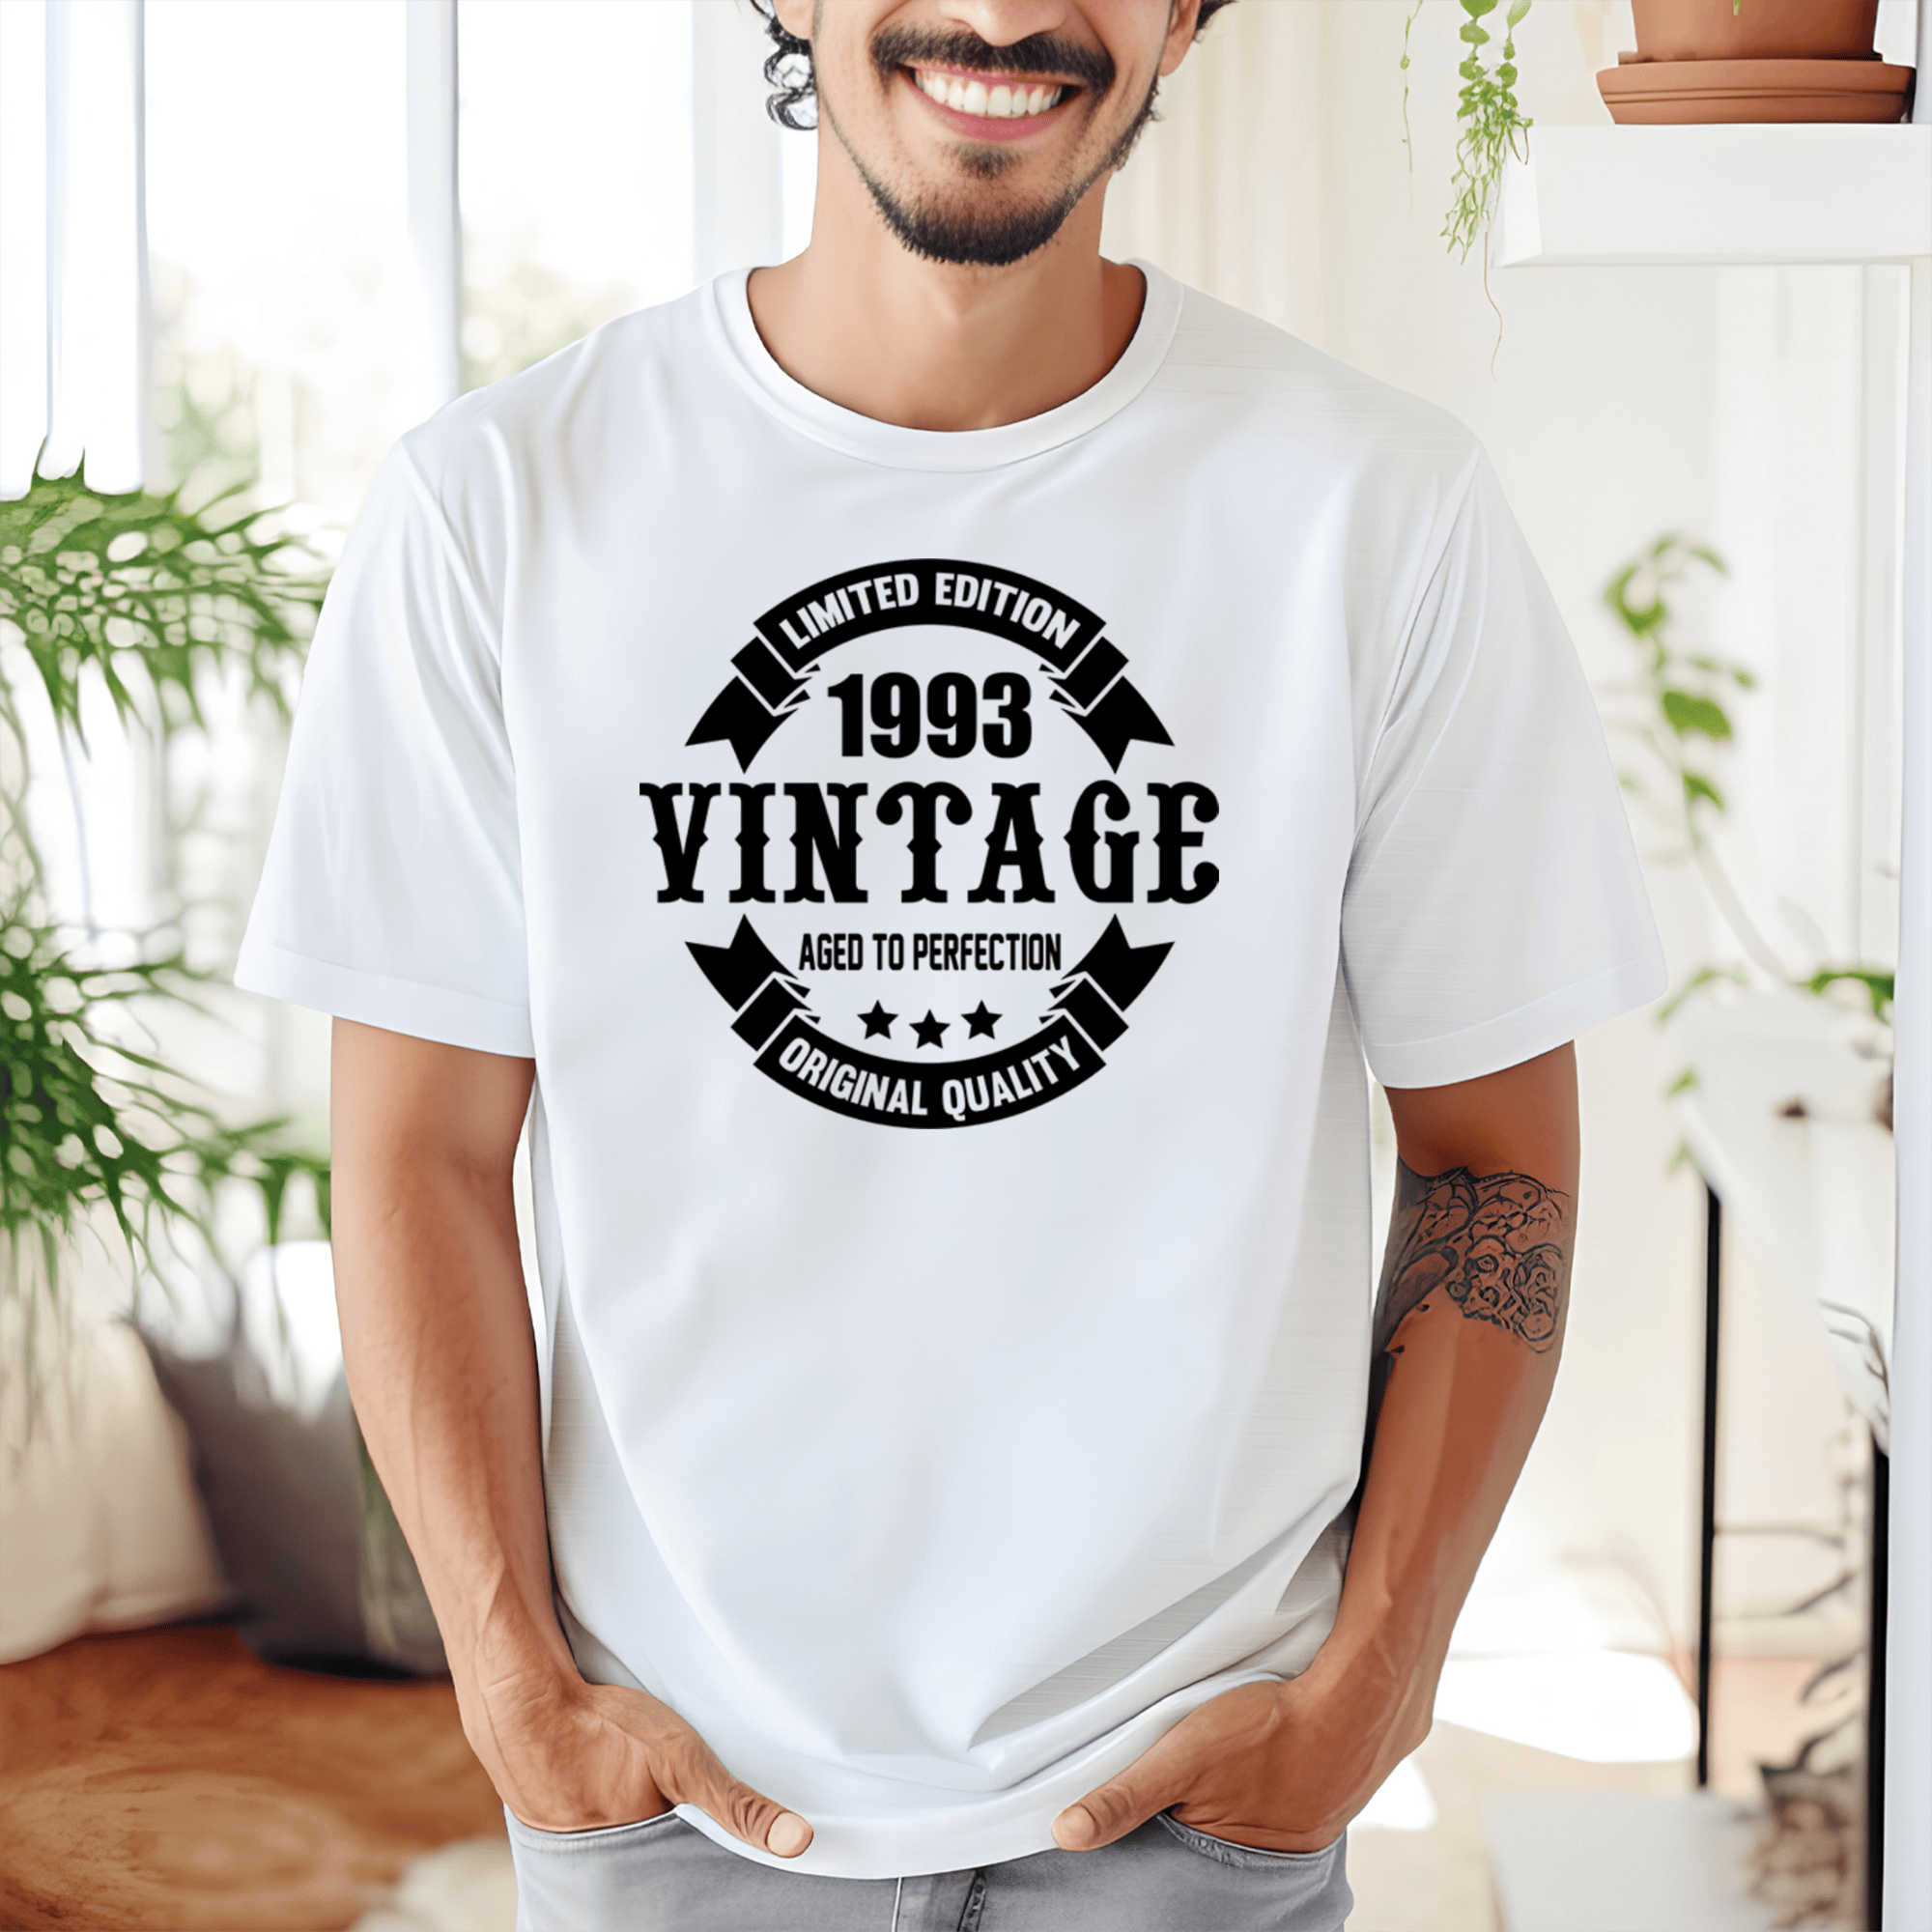 Mens White T Shirt with 1993-Vintage design